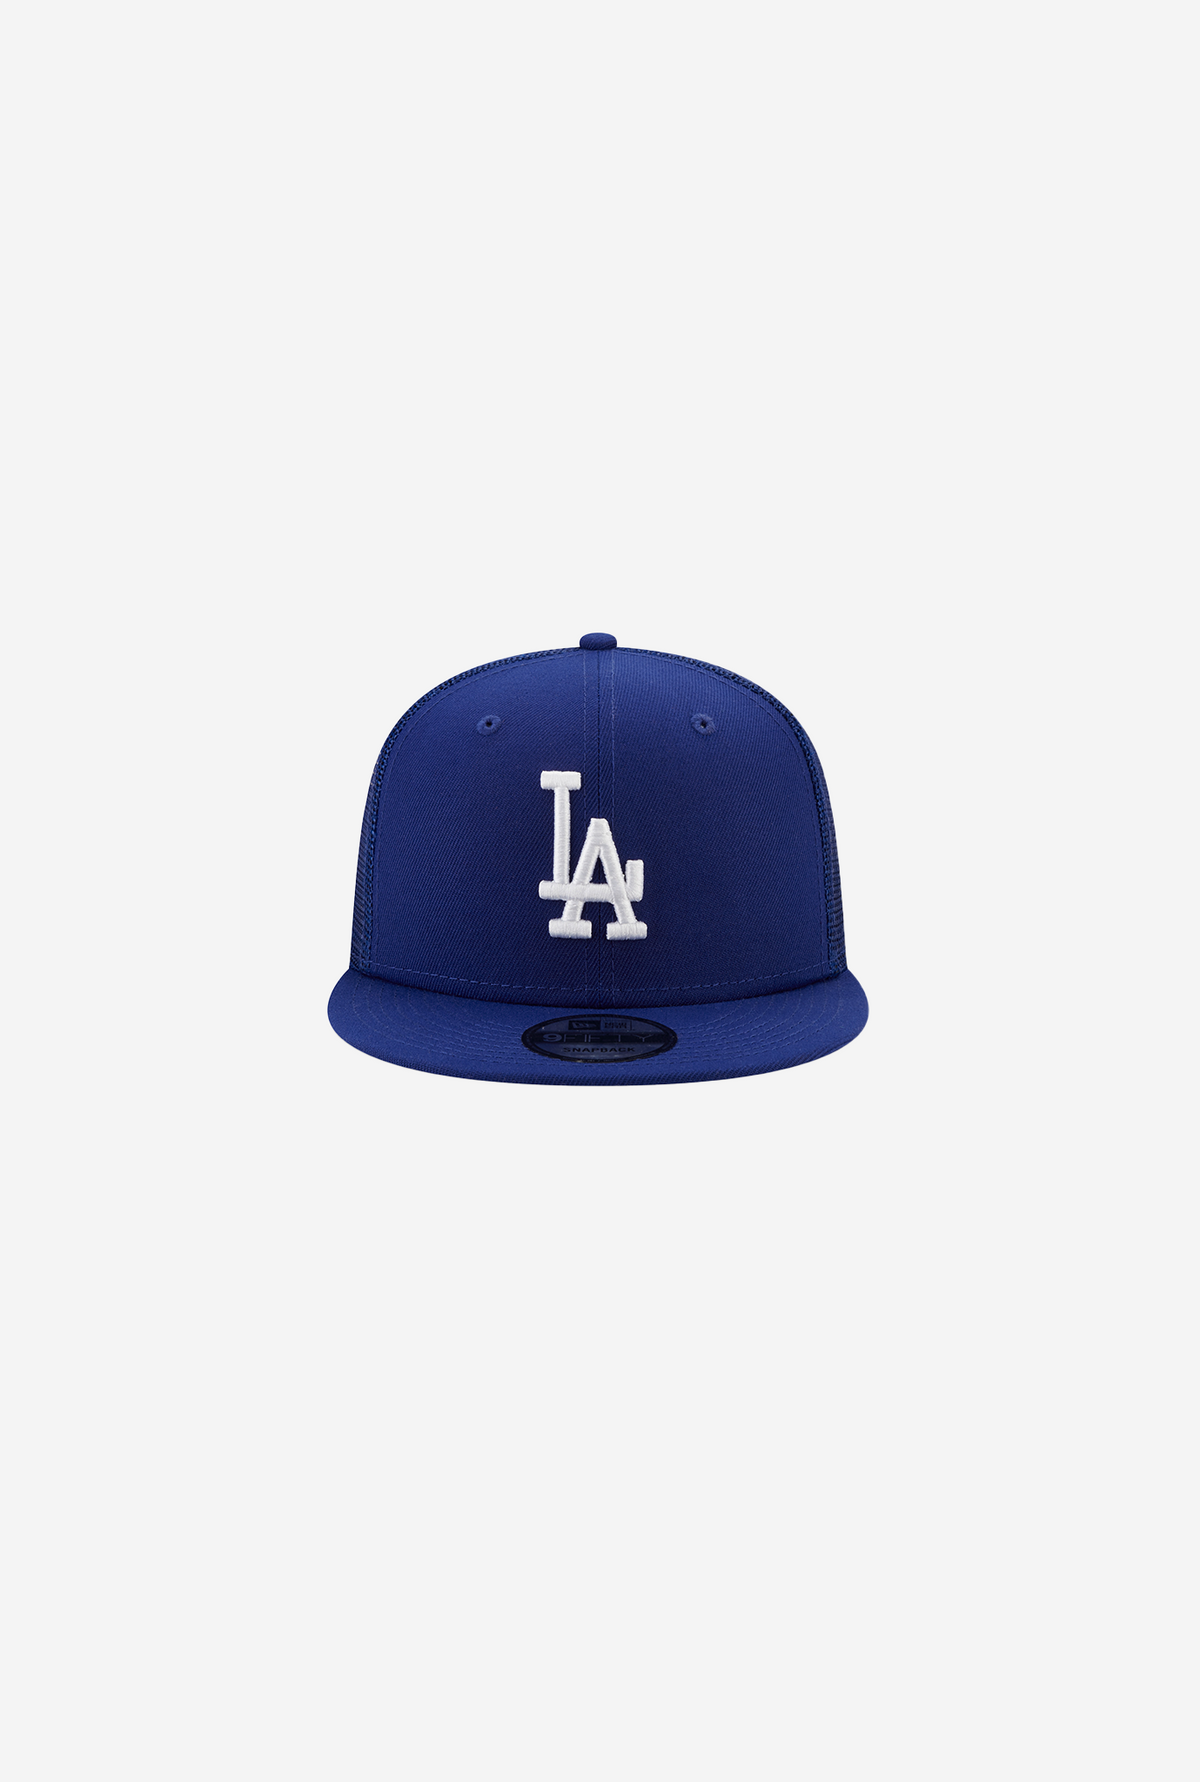 Los Angeles Dodgers 9FIFTY Classic Trucker - Royal